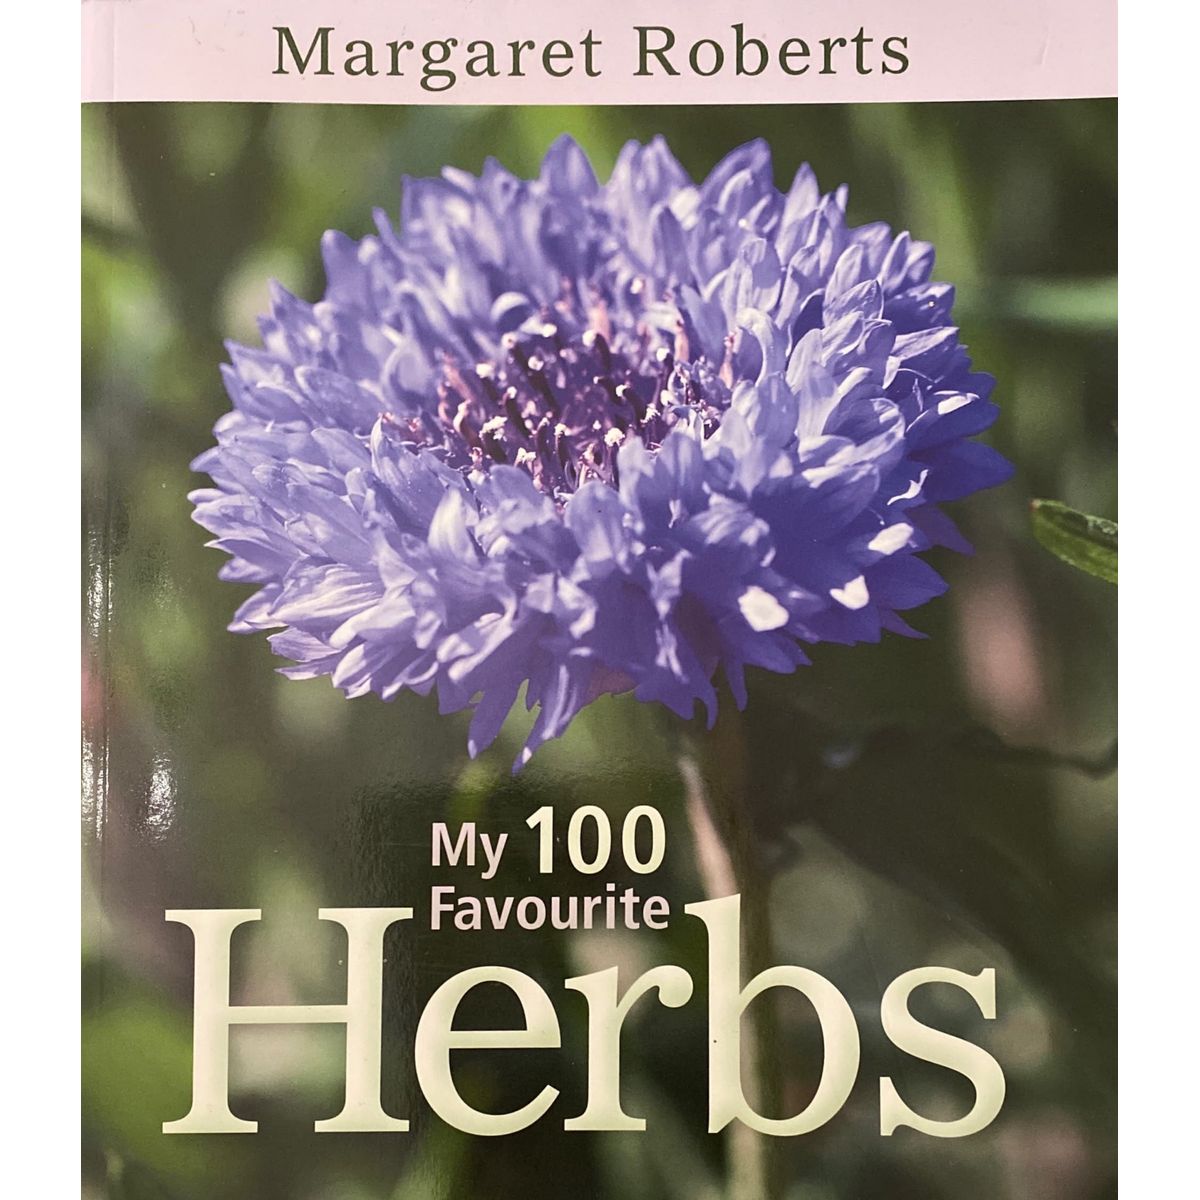 ISBN: 9781431702442 / 1431702447 - My 100 Favourite Herbs by Margaret Roberts [2012]